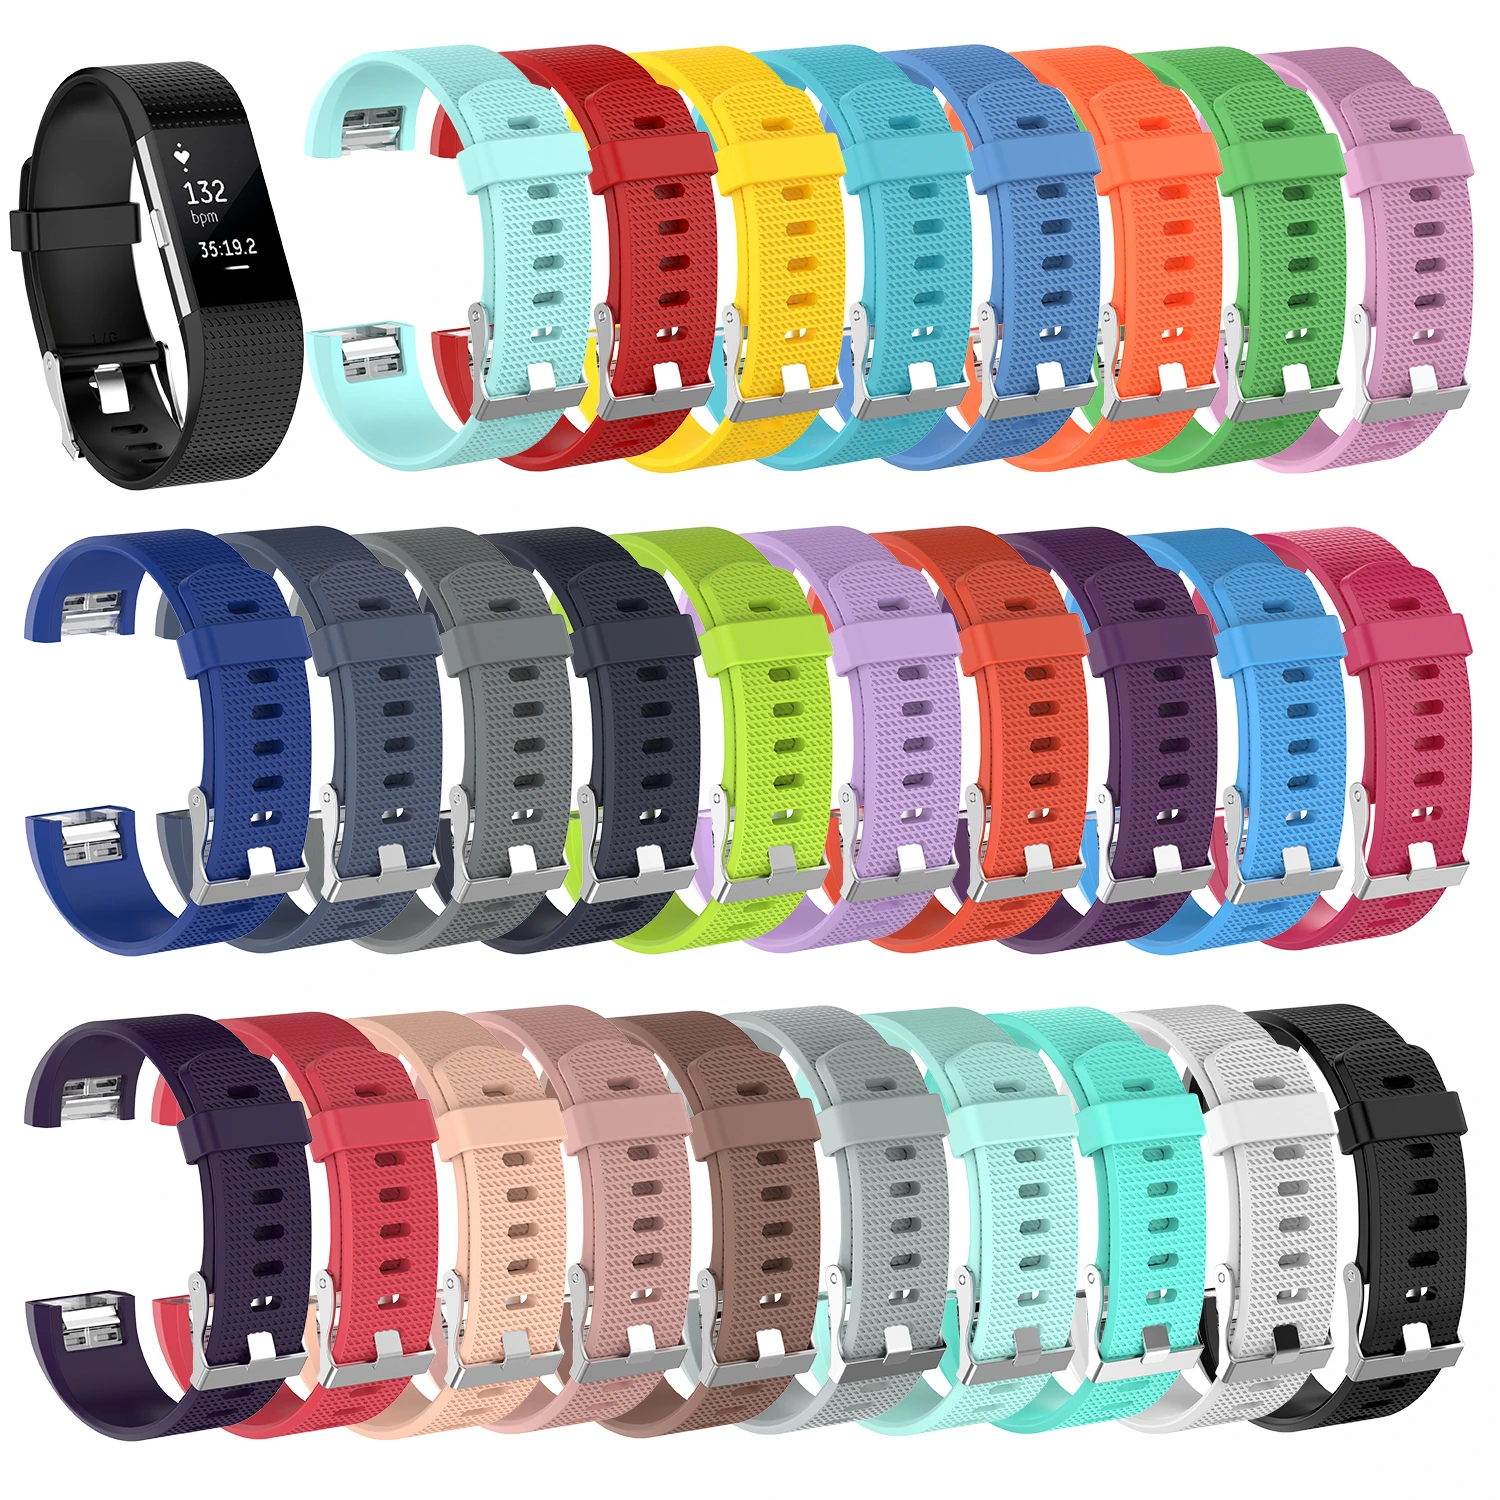 Replacement Wristband For Fitbit Charge 2 Band Silicone Fitness Small Large 